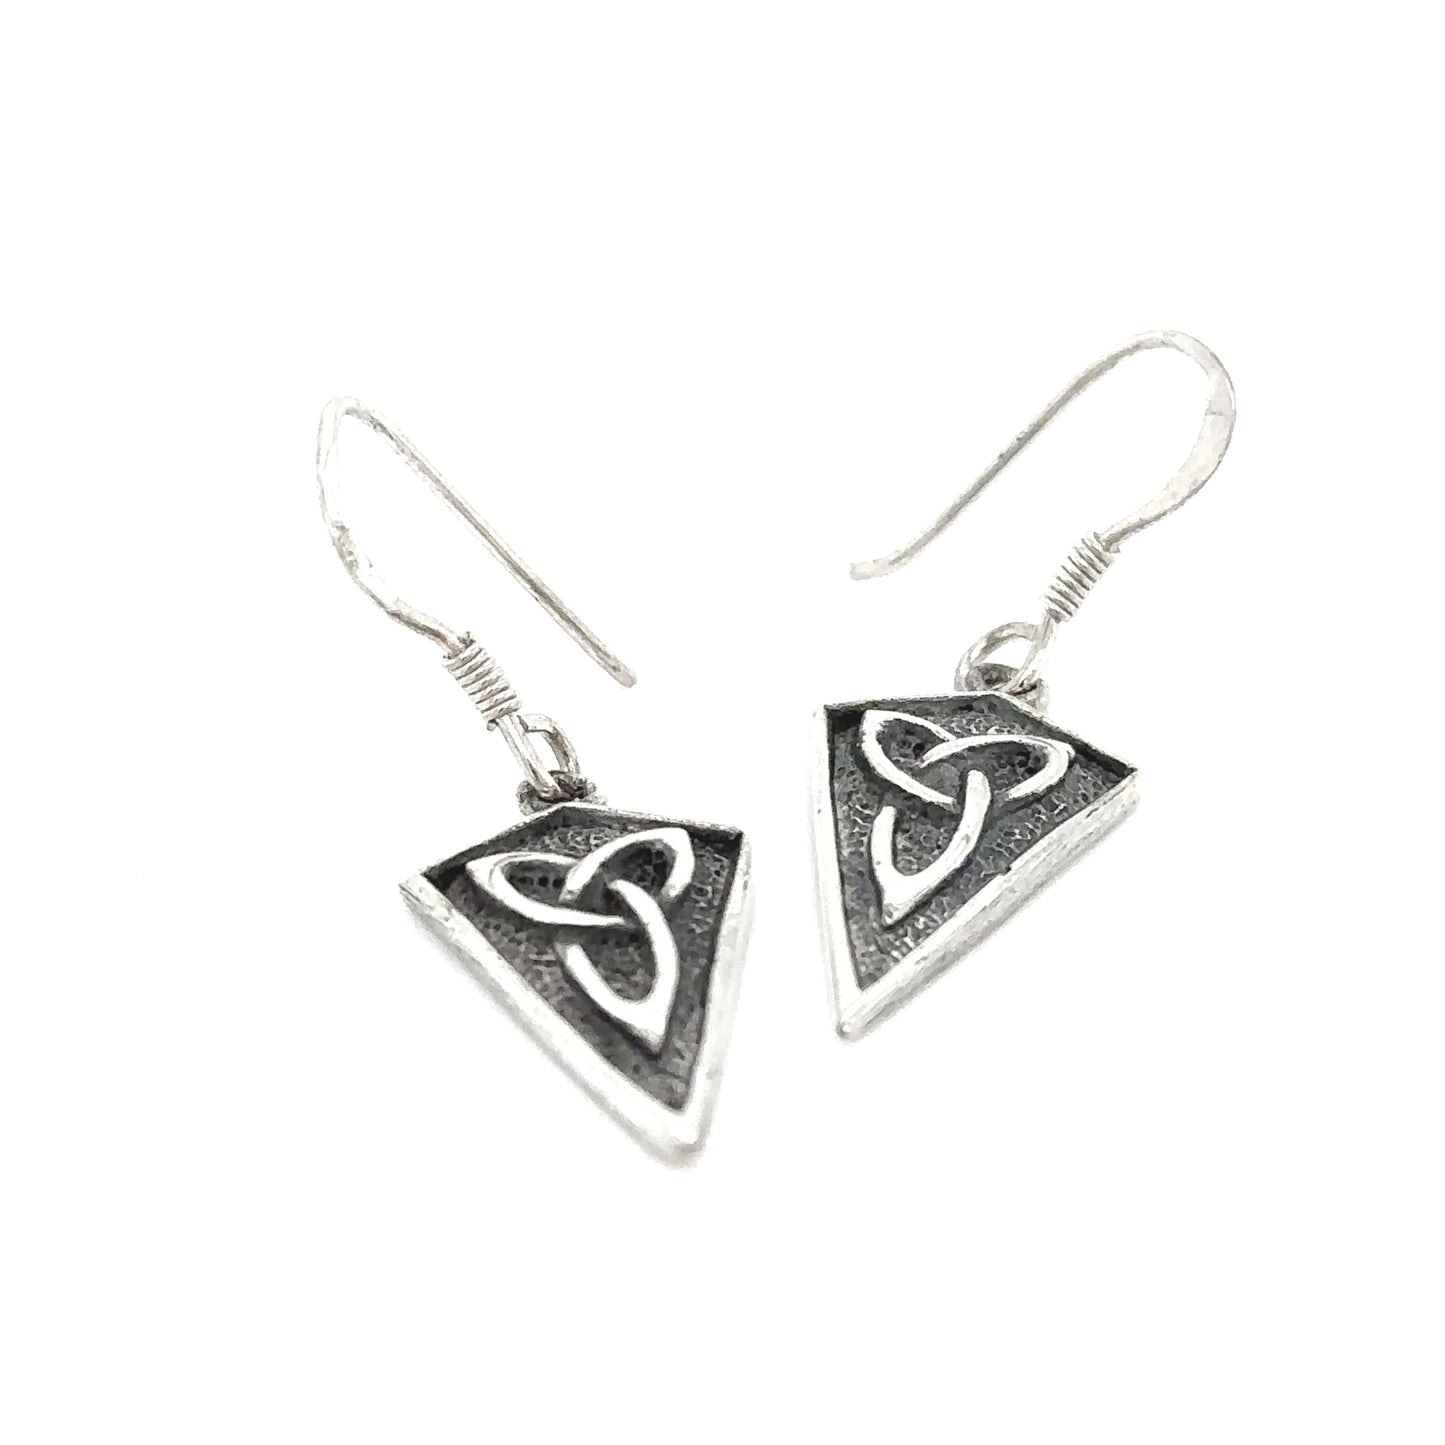 A pair of Super Silver Celtic Trinity Shield earrings, symbolizing love and unity.